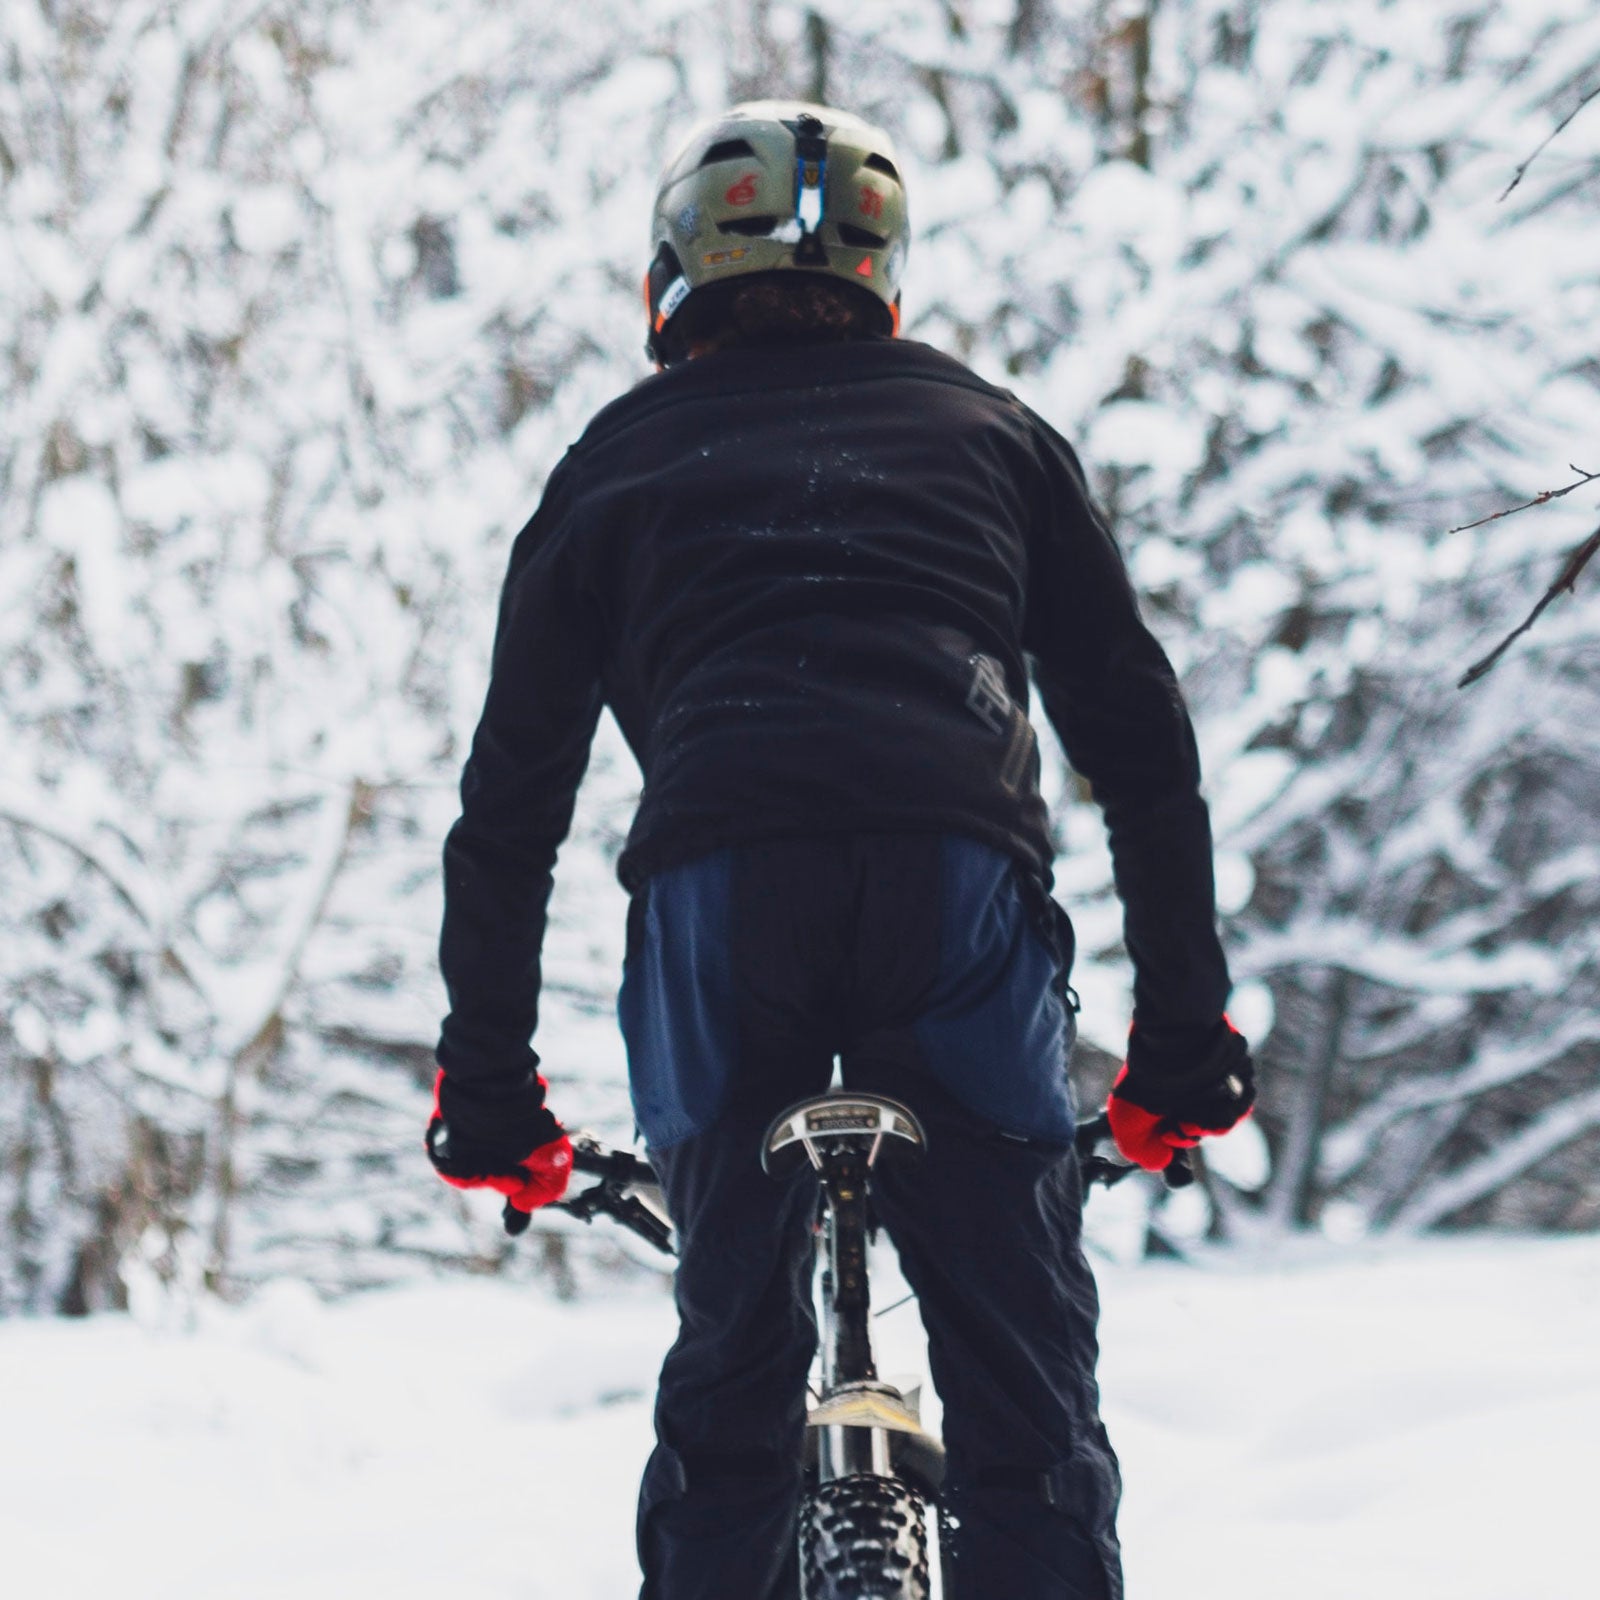 https://cdn.outsideonline.com/wp-content/uploads/2020/01/07/cold_bicycle_man_biking_in_the_cold_s.jpg